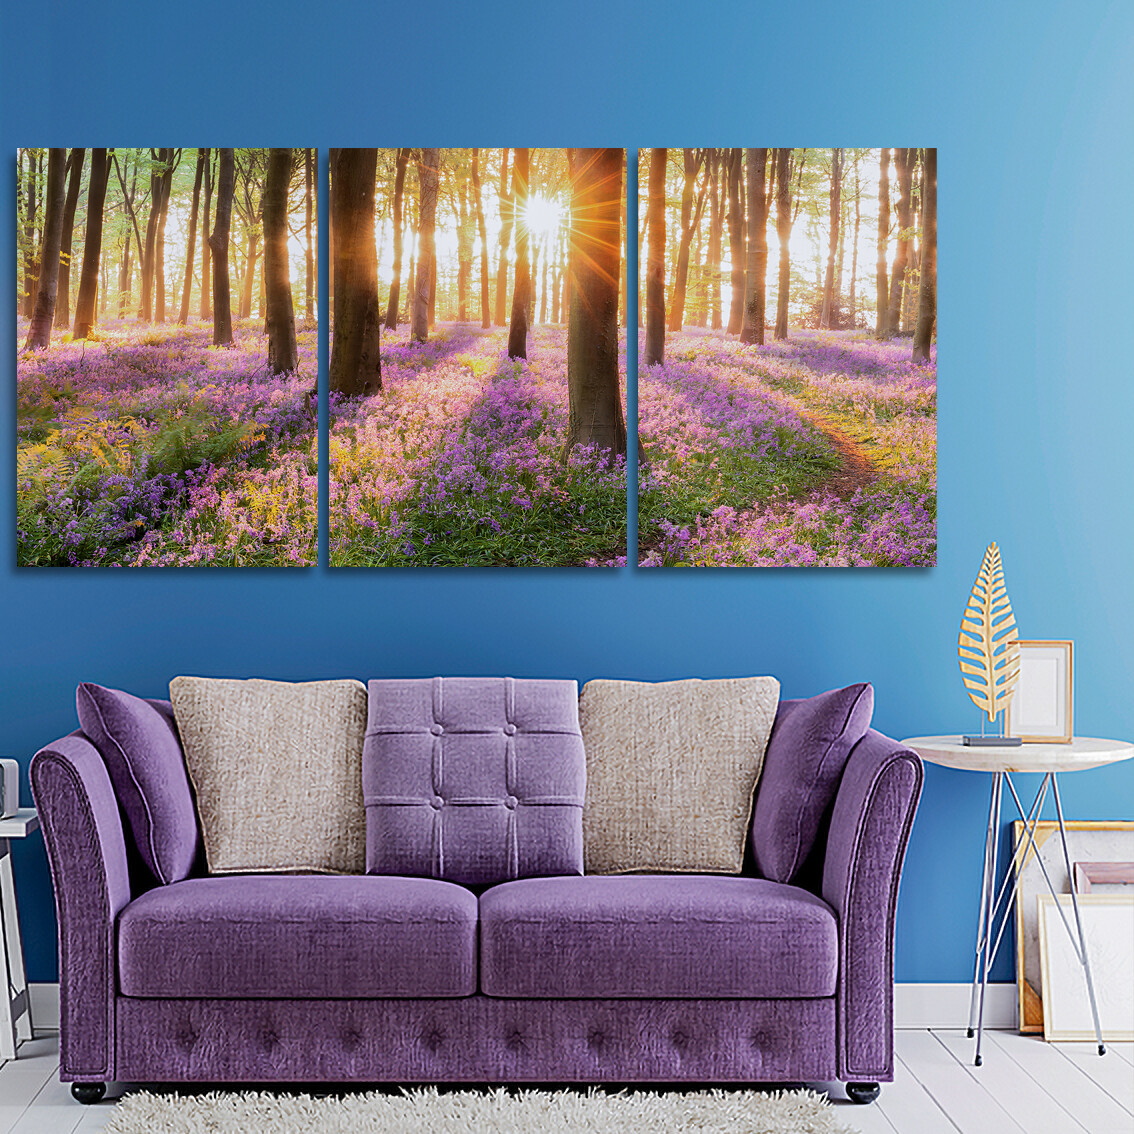 Woodland Bluebell Forest - Modern Luxury Wall art Printed on Acrylic Glass - Frameless and Ready to Hang